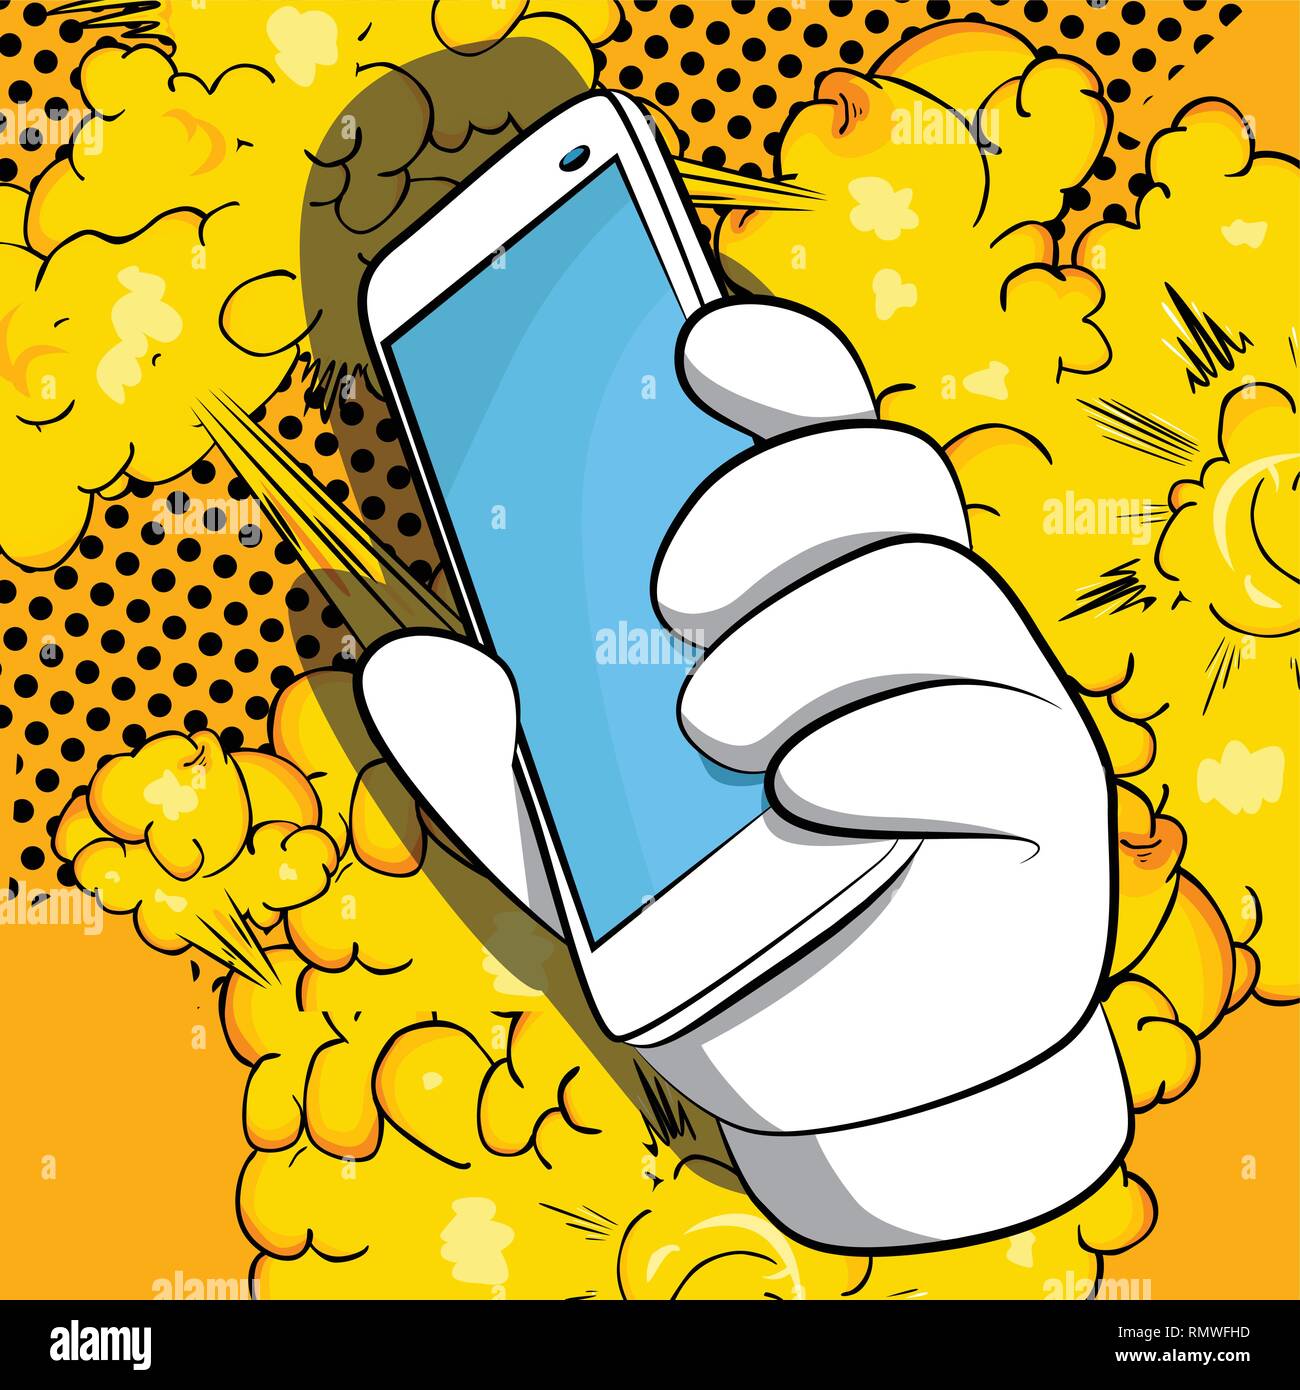 Vector Cartoon Hand Holding A Cell Phone Illustrated Hand With Smart Phone On Comic Book Background Stock Vector Image Art Alamy